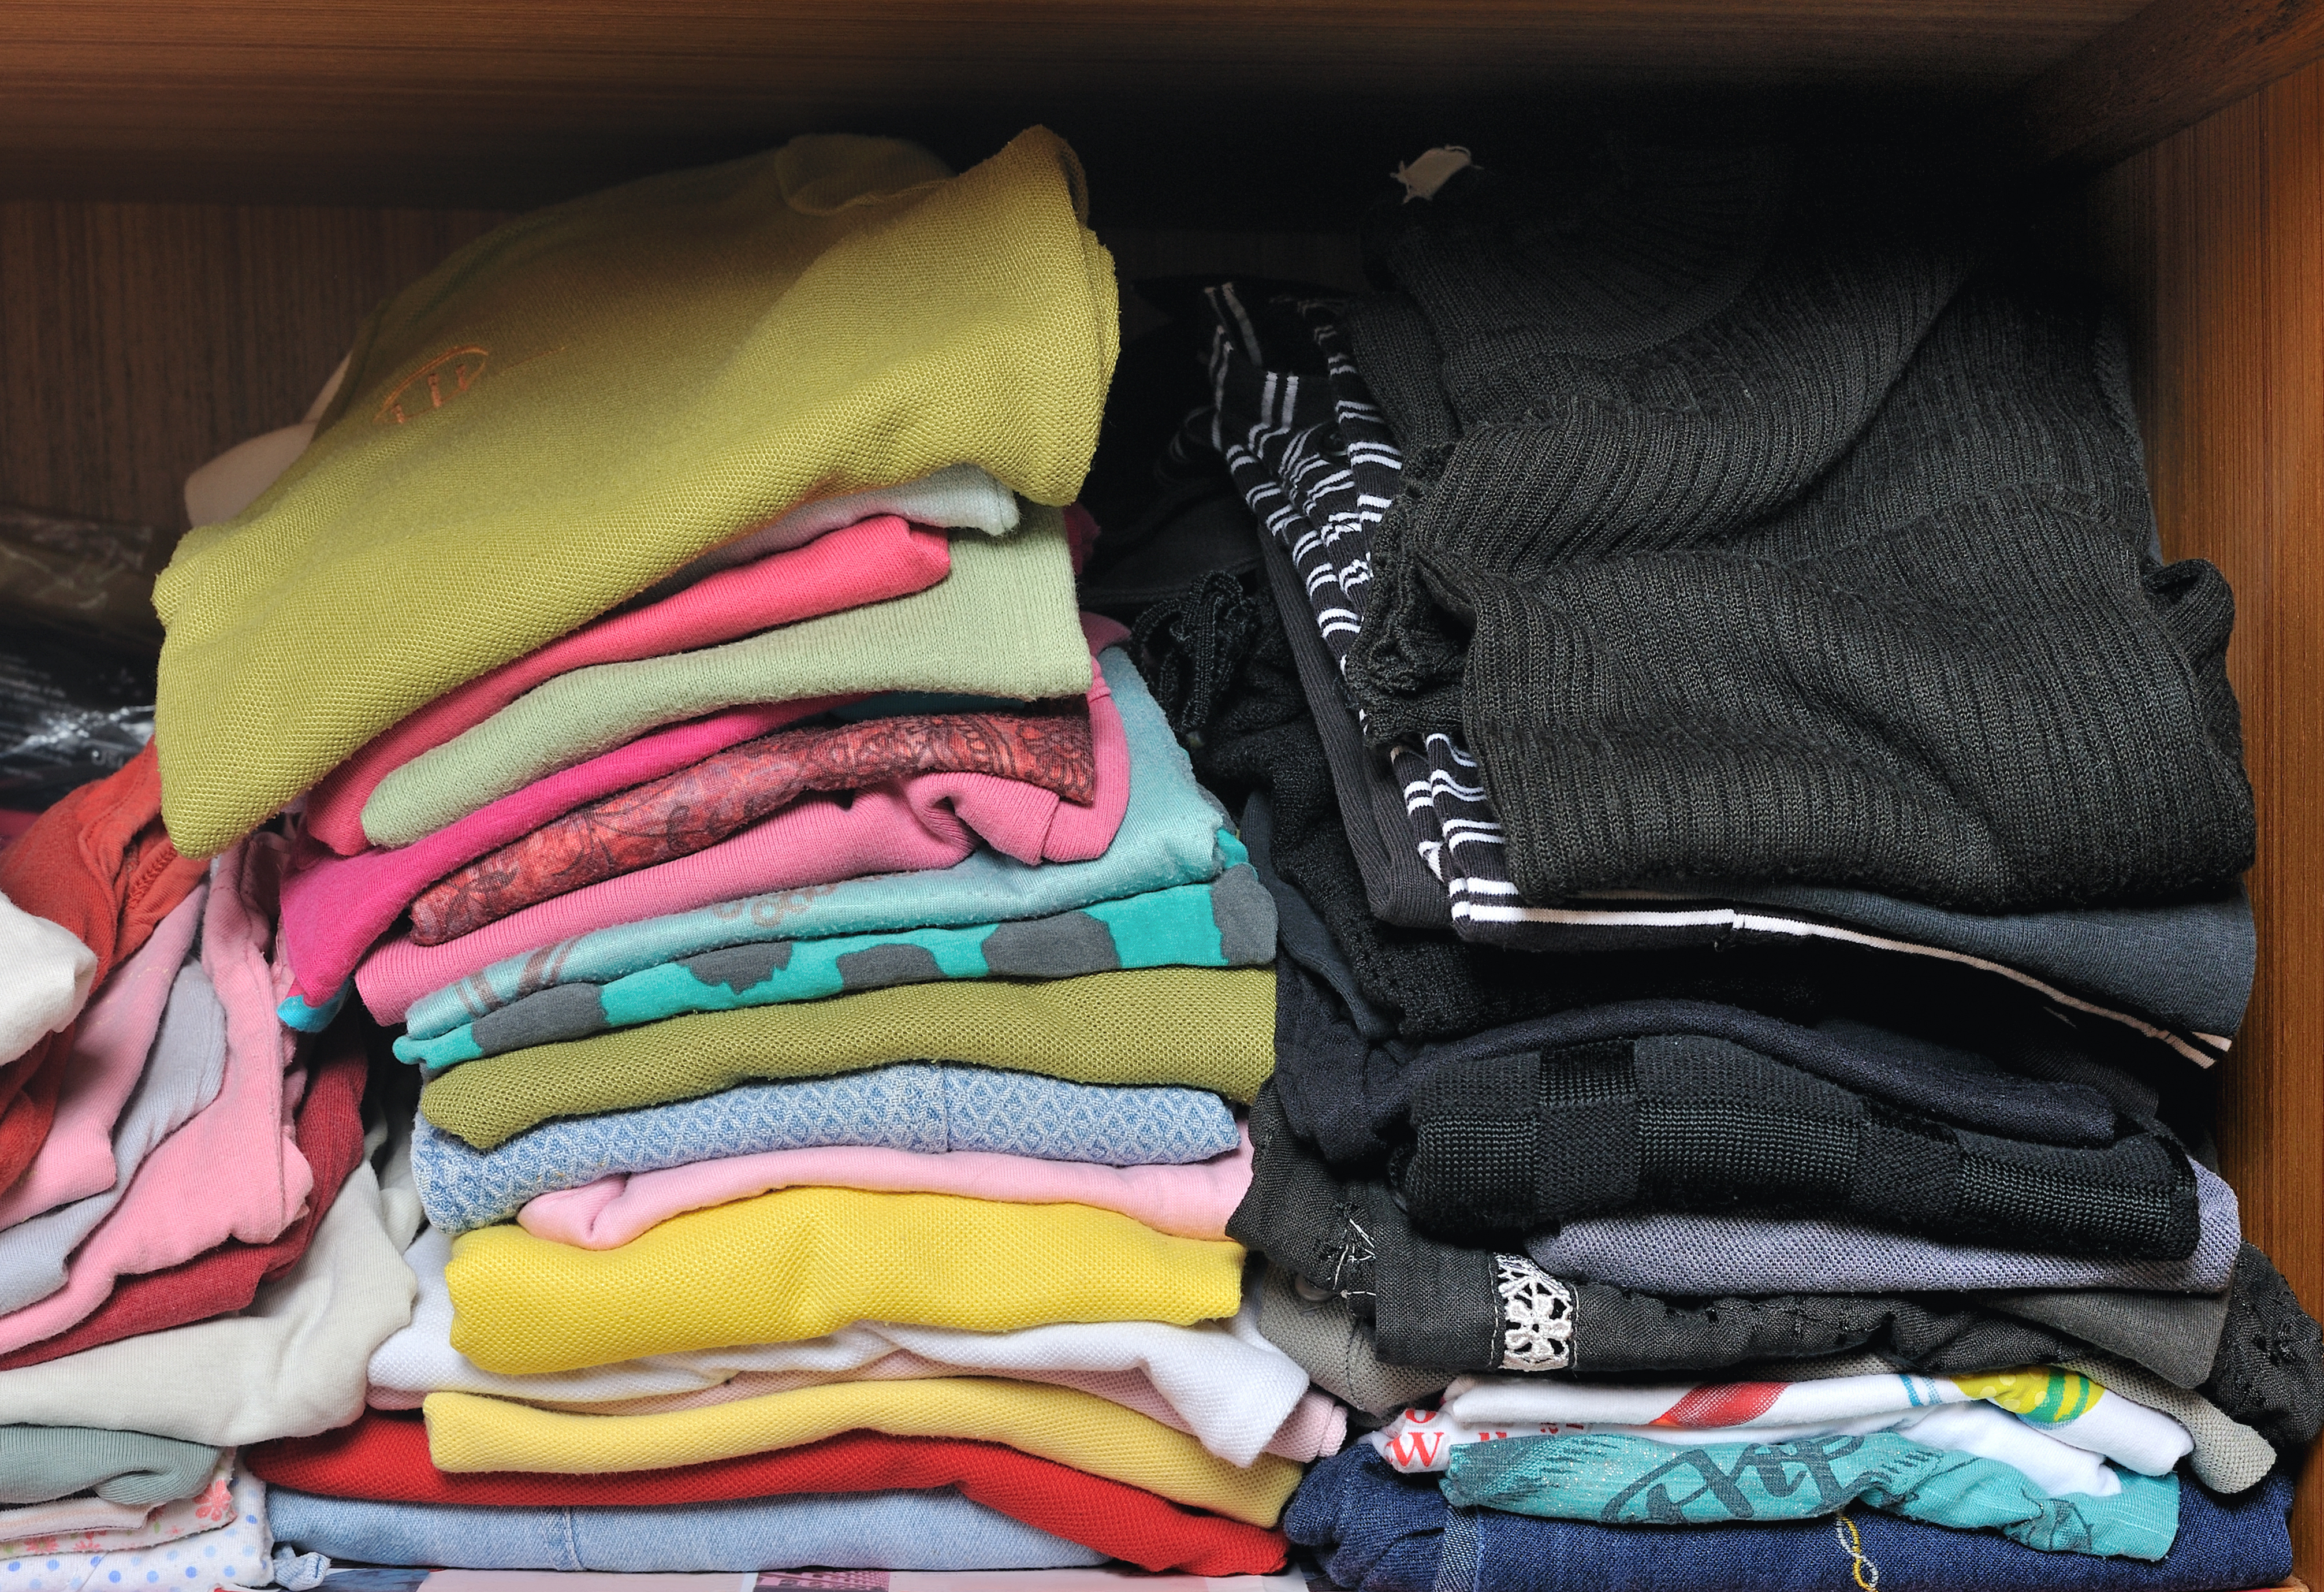 A pile of clothes in a closet | Source: Shutterstock